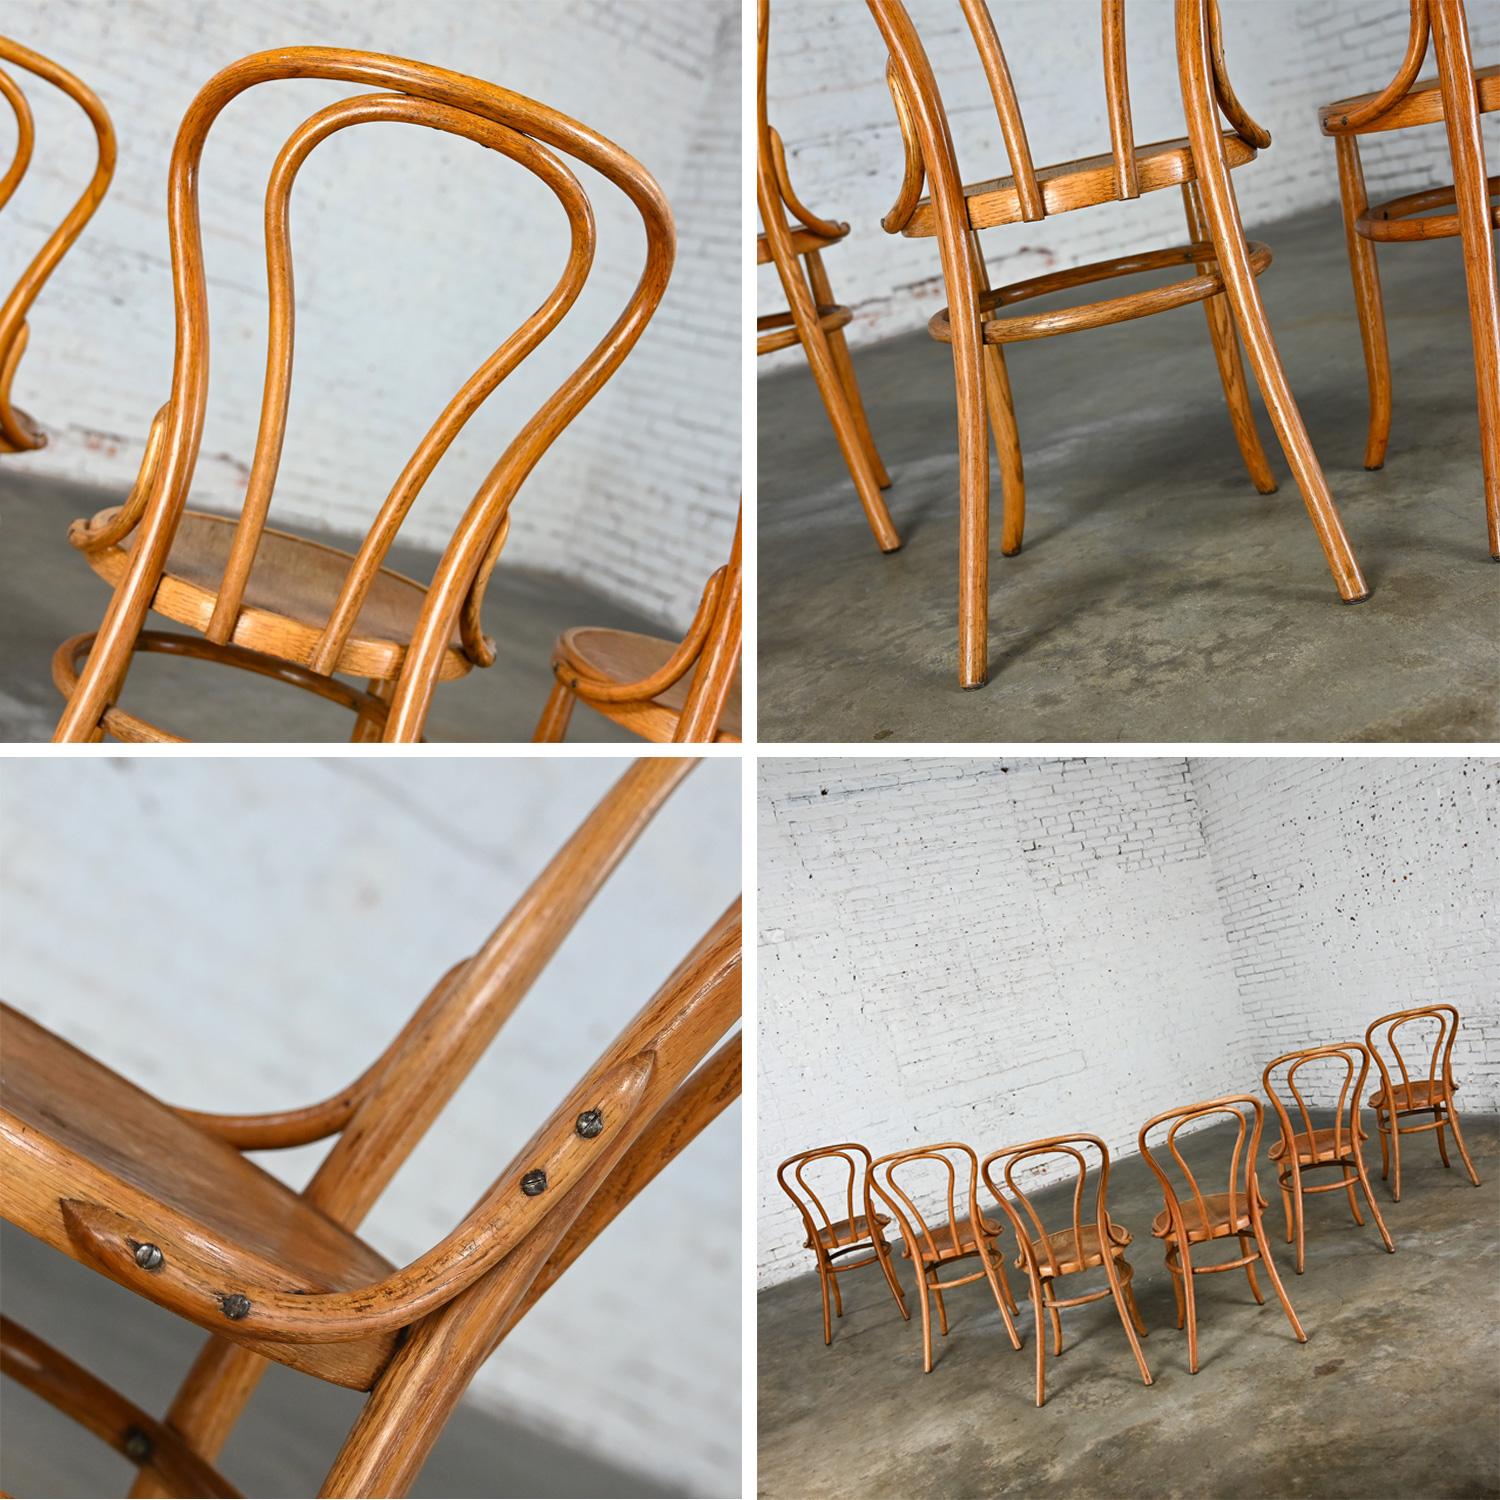 Bauhaus Oak Bentwood Chairs Attributed to Thonet #18 Café Chair Set of 6 For Sale 1